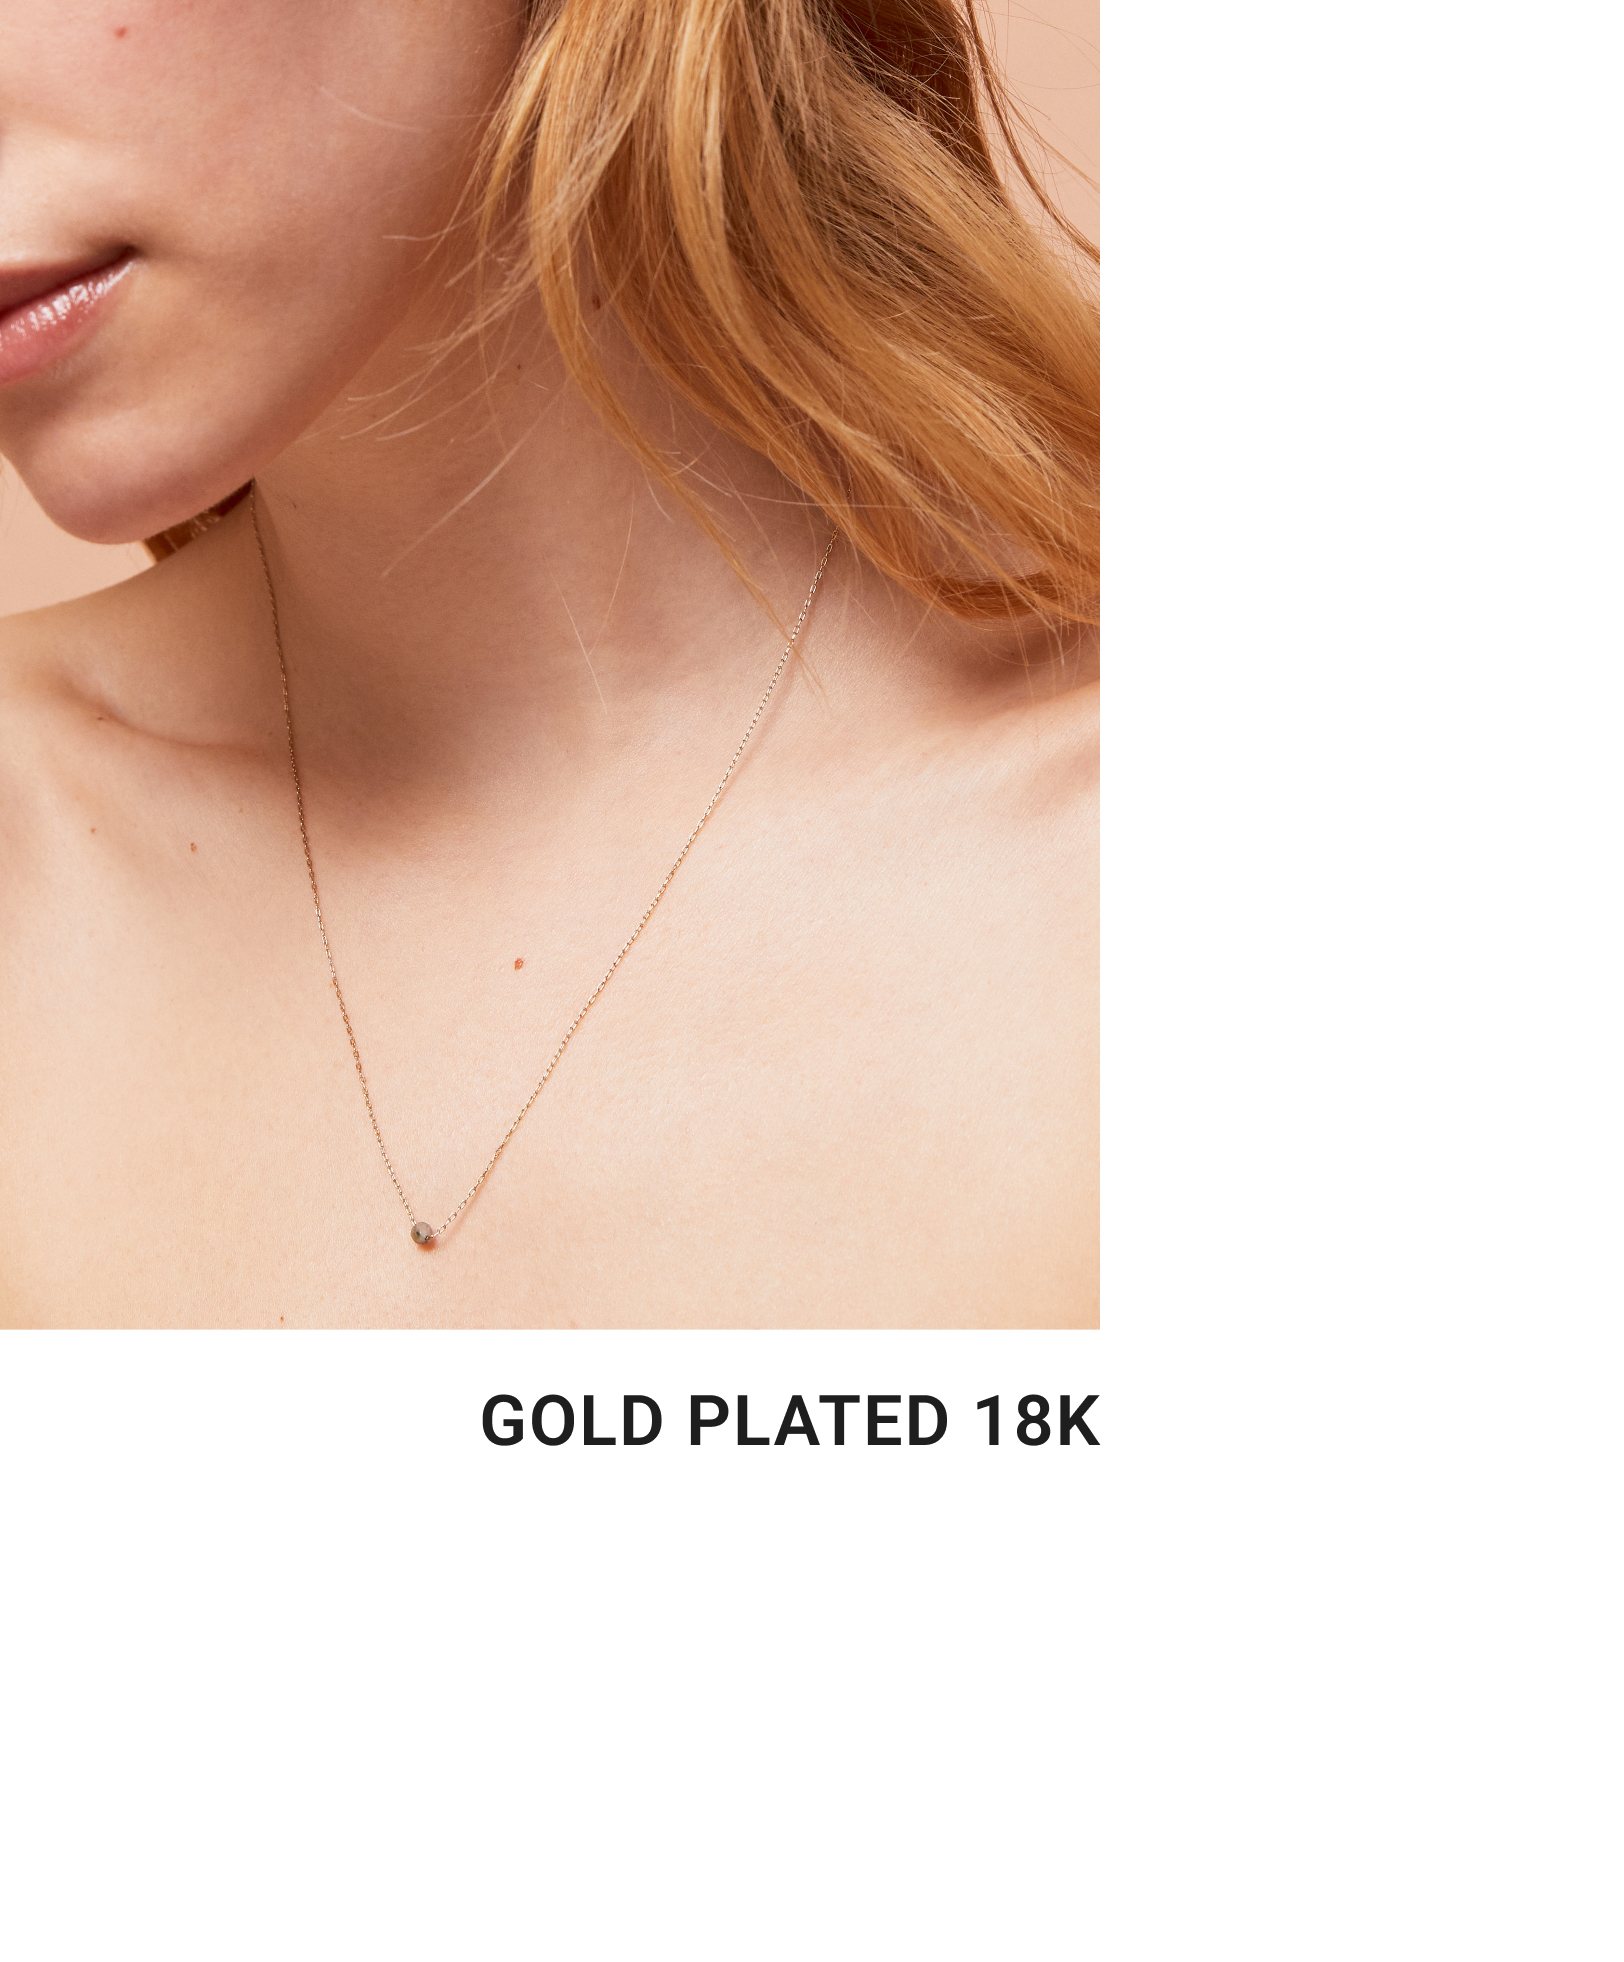 18k gold plated chain and stone necklace